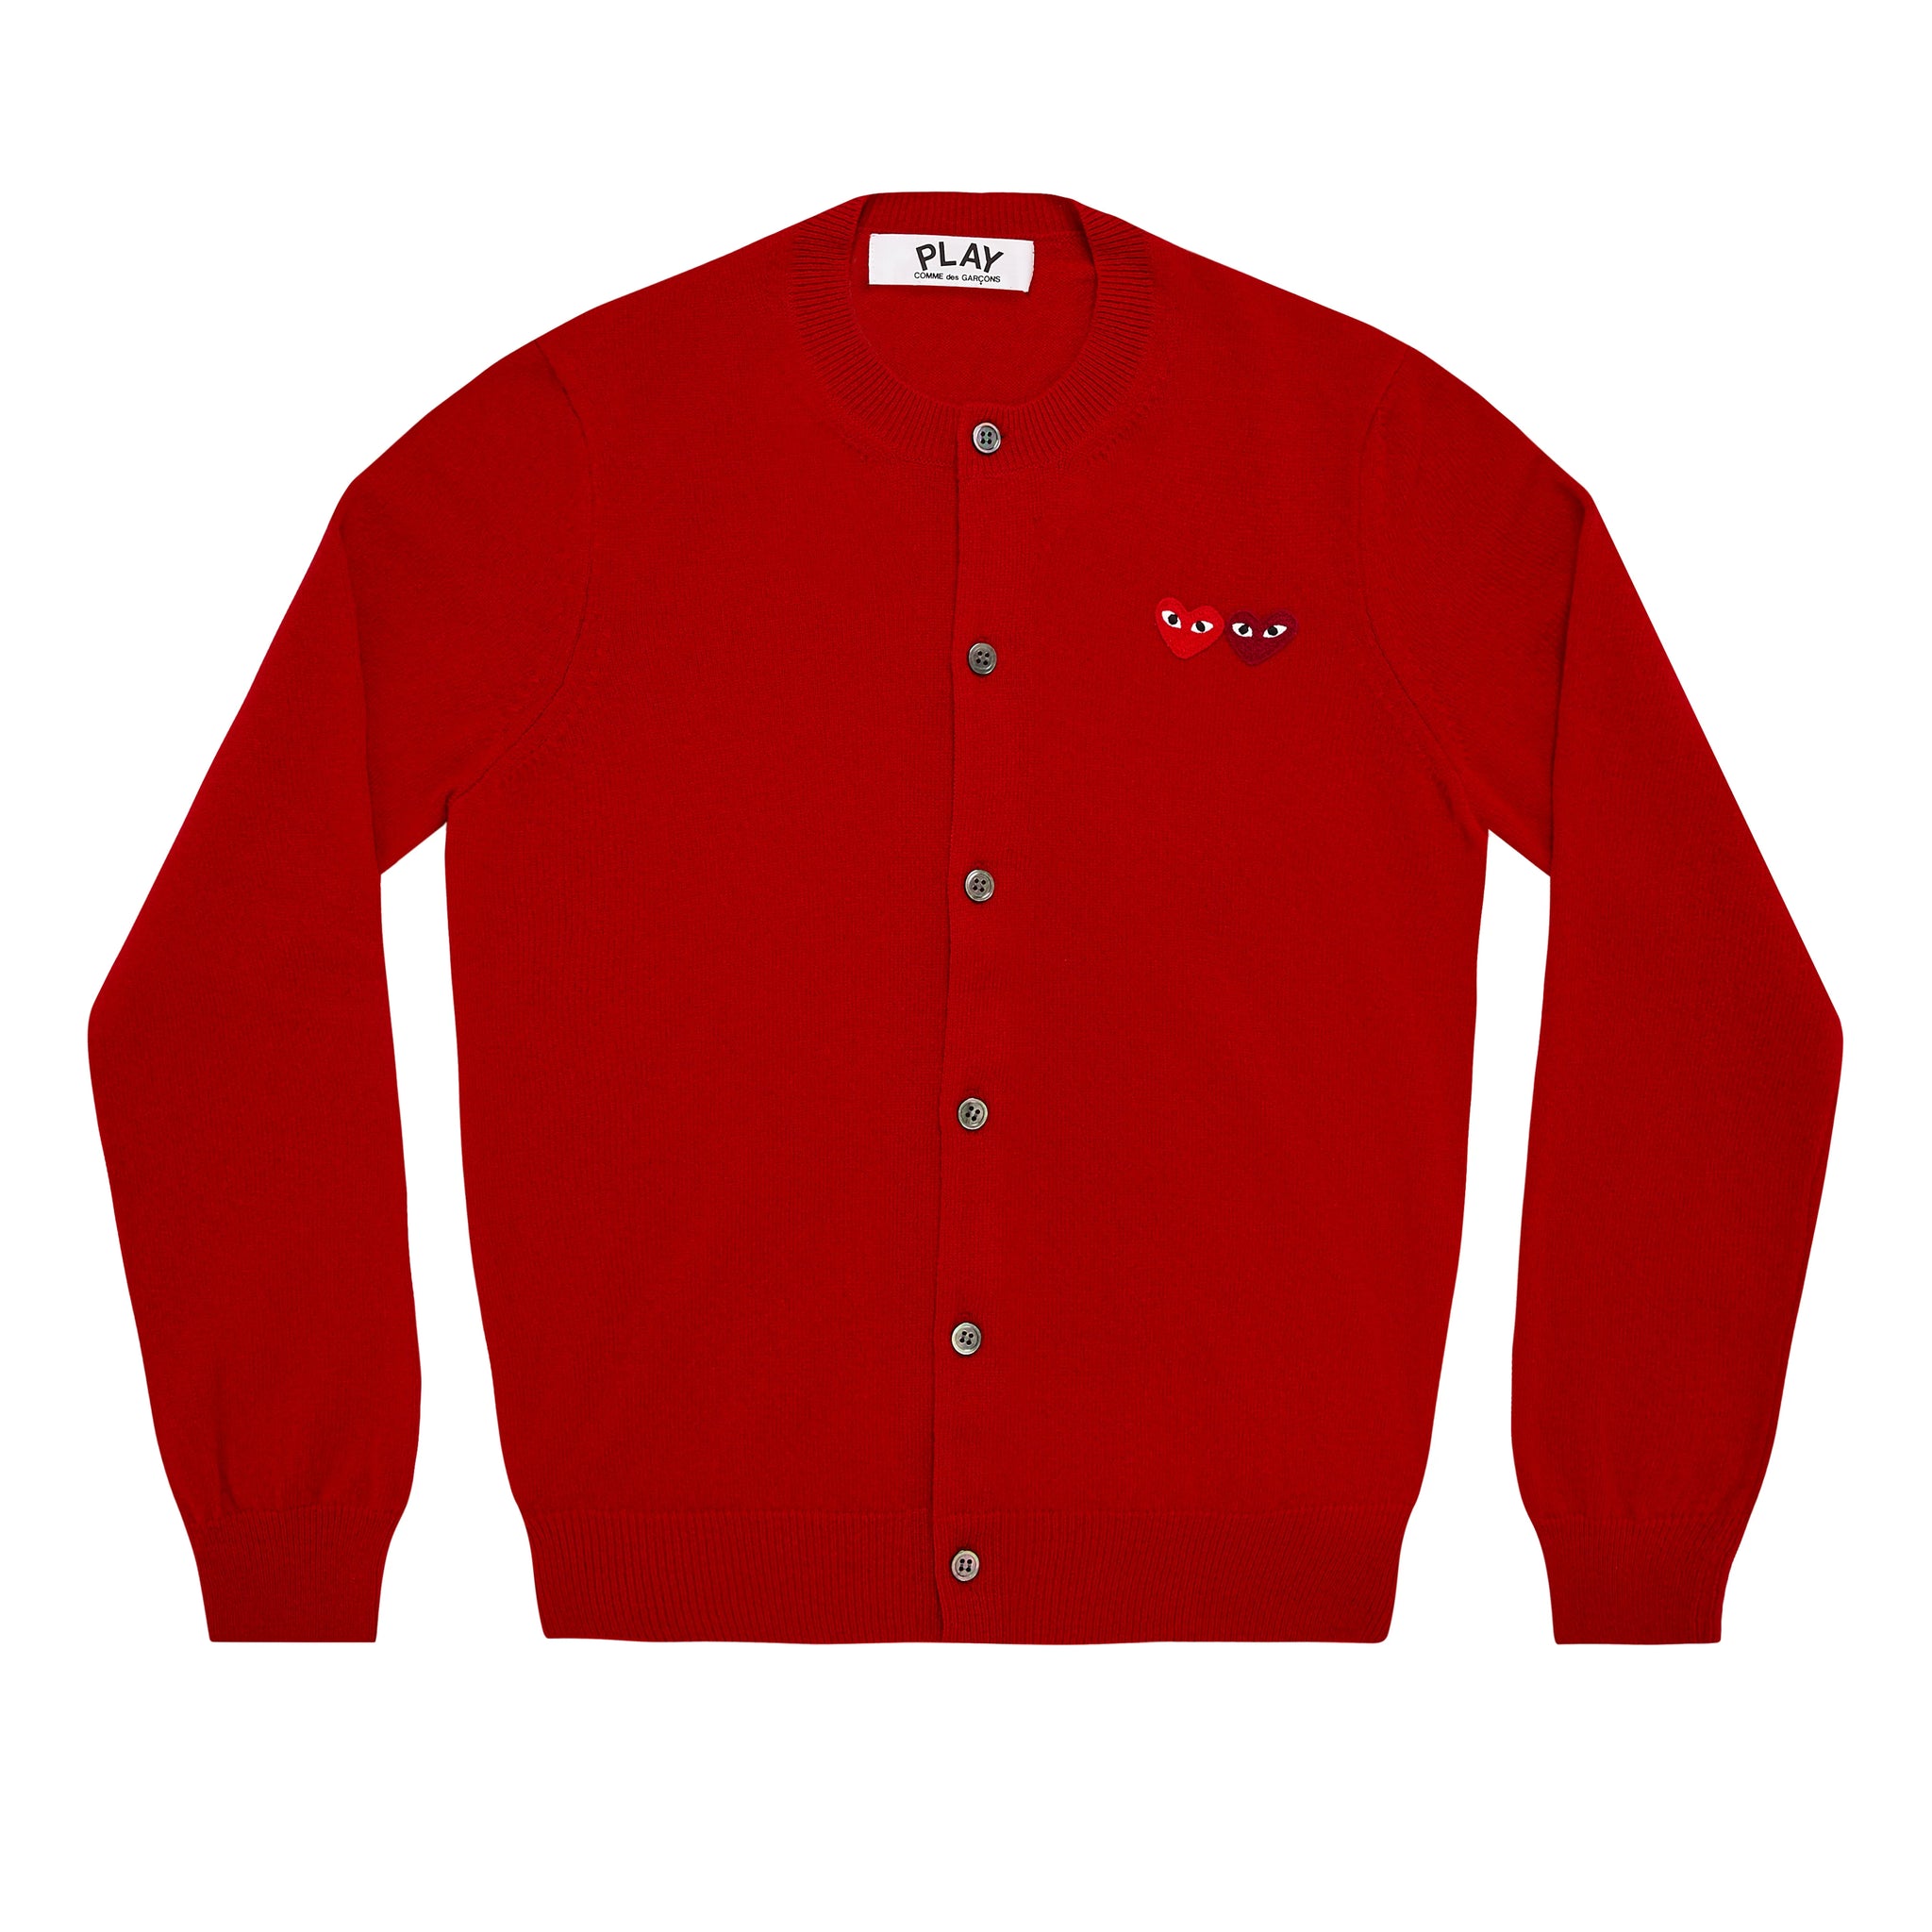 PLAY Women's Cardigan with Double Emblems Red